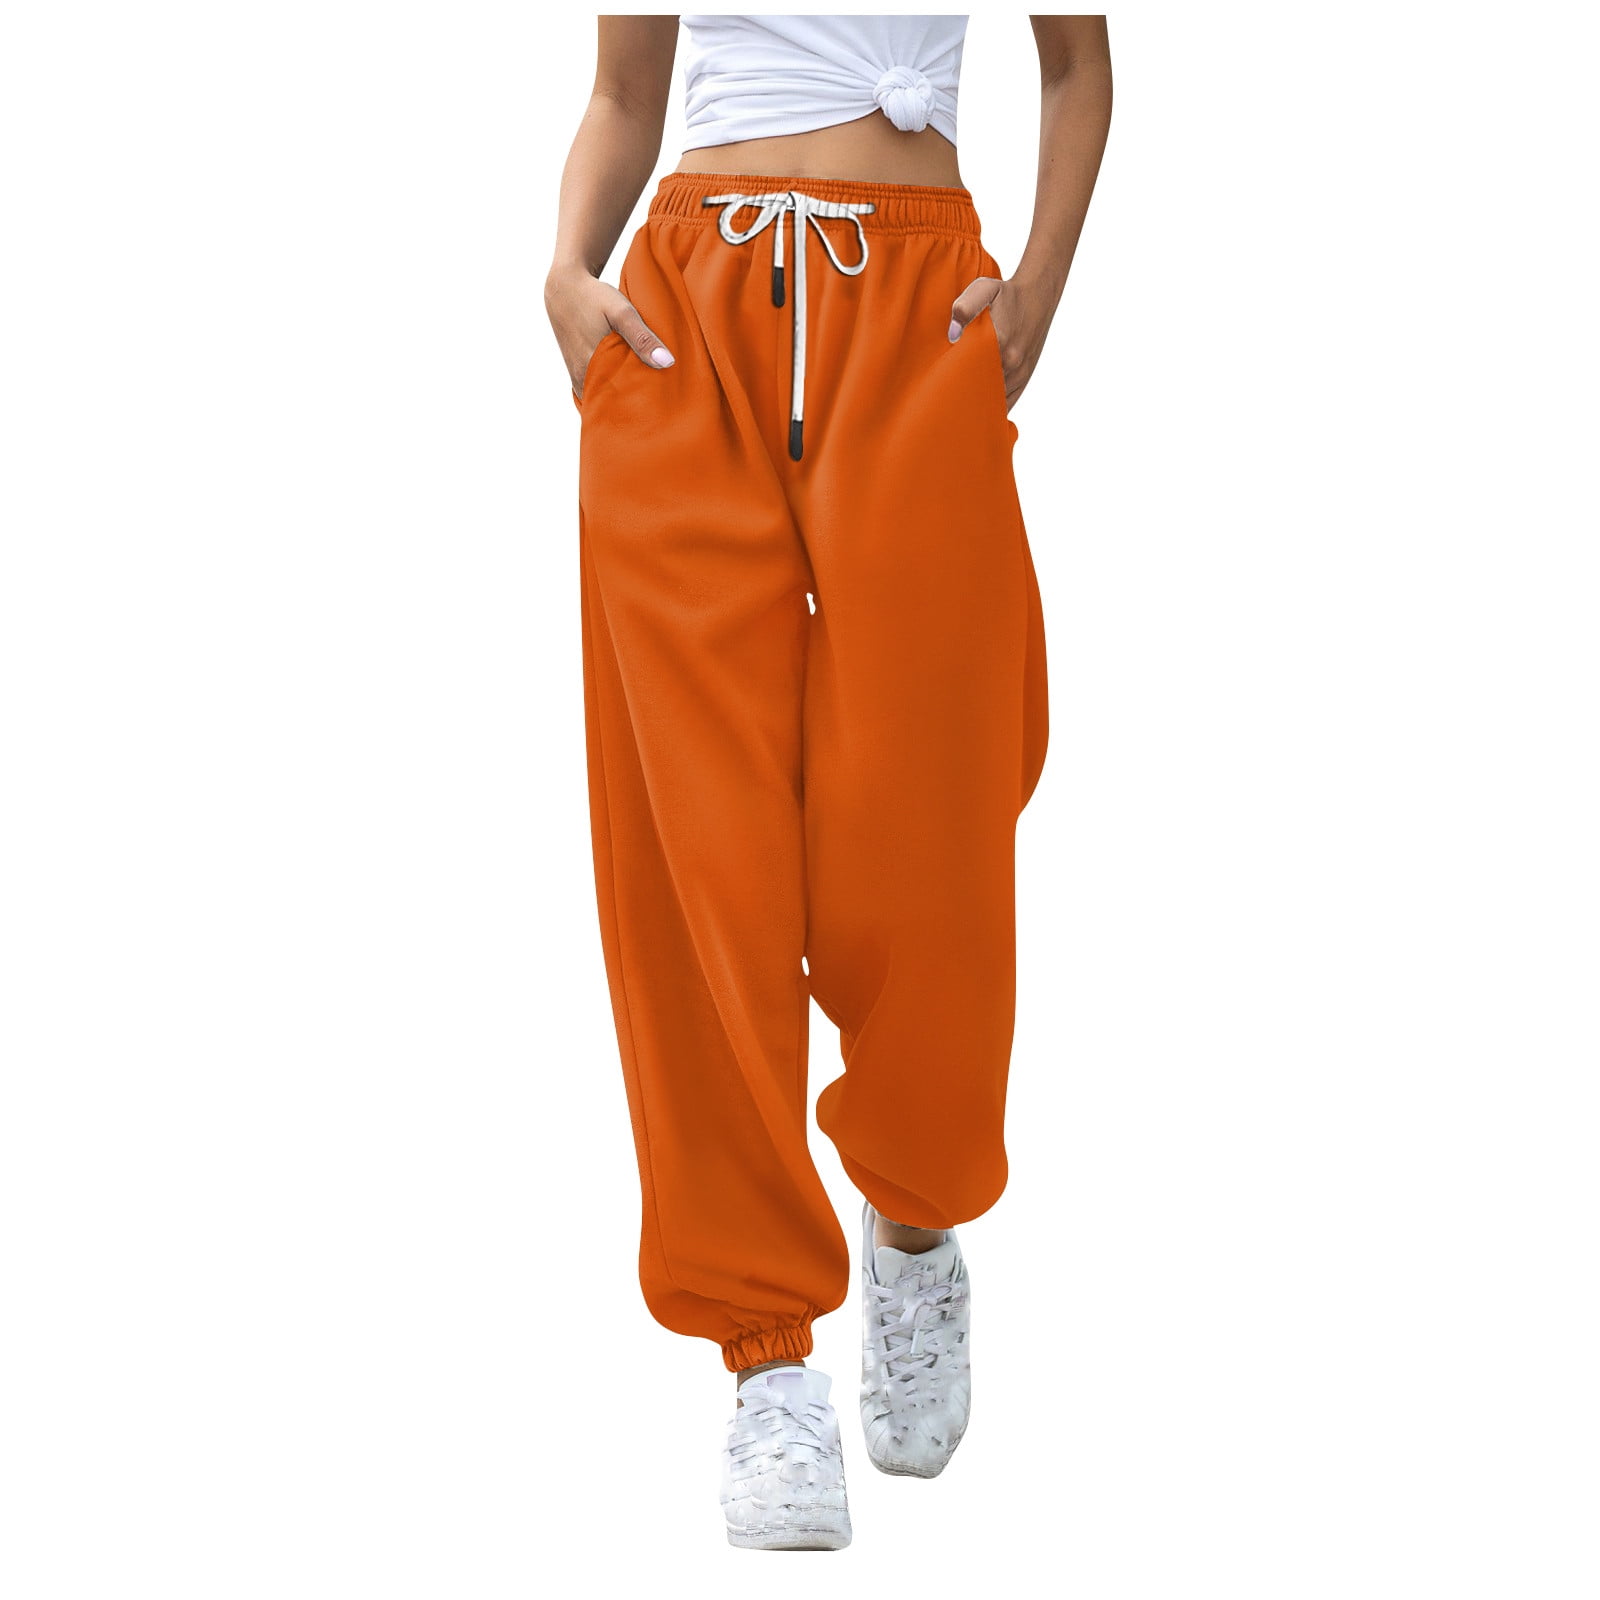  Womens Cinch Bottom Sweatpants Lounge Comfy Joggers Comfy  Training Track Pant Casual Loose Drawstring Pockets Pants Purple :  Clothing, Shoes & Jewelry